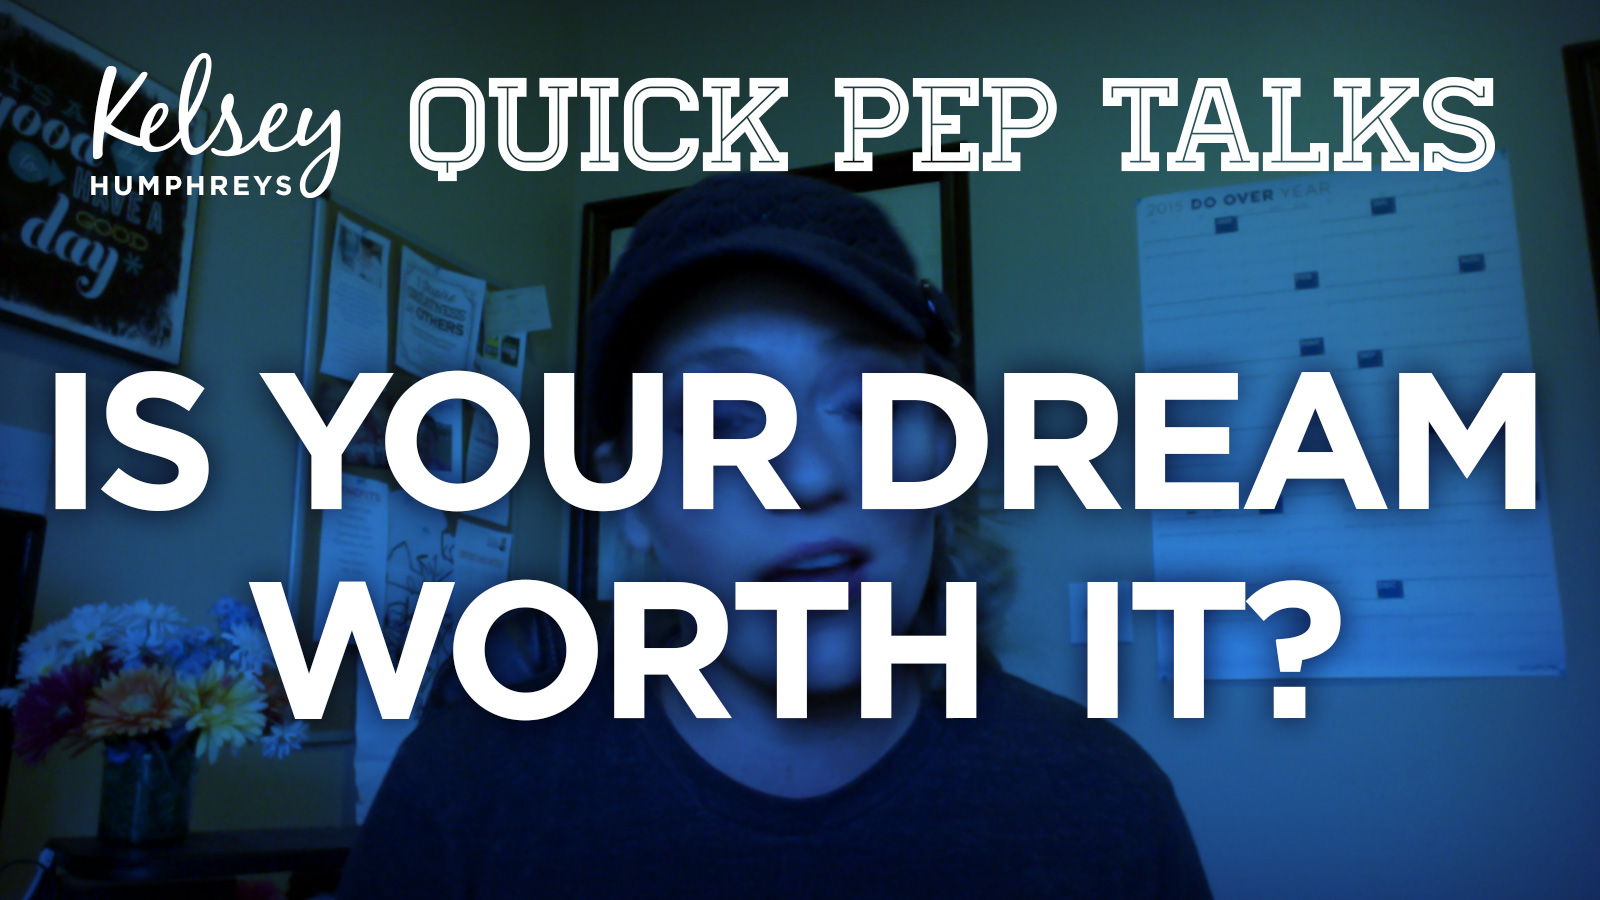 Is Your Dream Worth It?